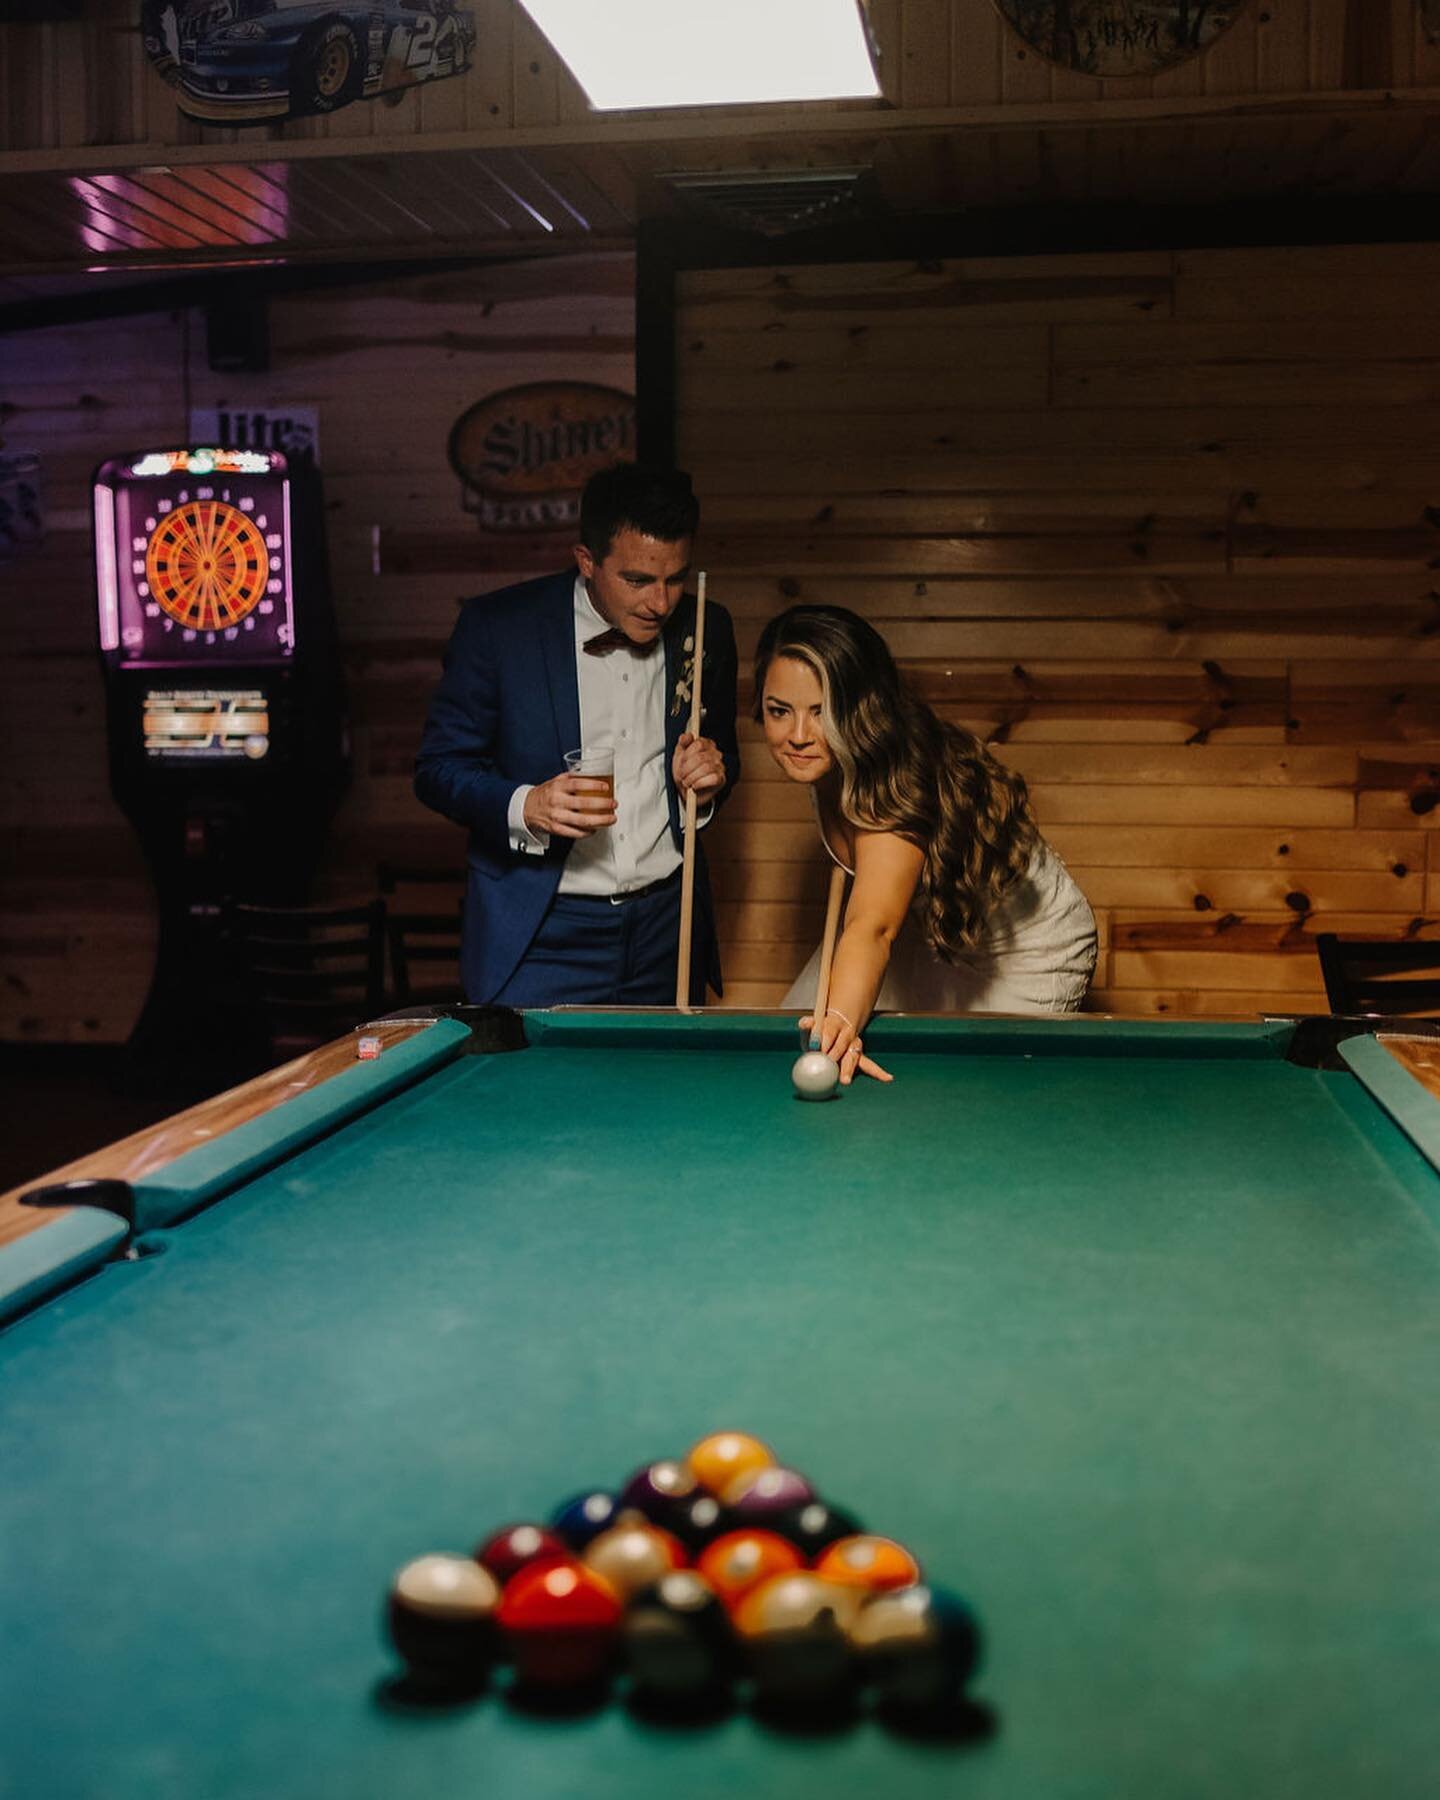 Sometimes you just need to find your local watering hole to chill a bit before your ceremony - this crew was the best! 
&bull;
Finding local spots like your local bowling alley, laundry mat, etc always make for fun photos&hellip; *always plan ahead a